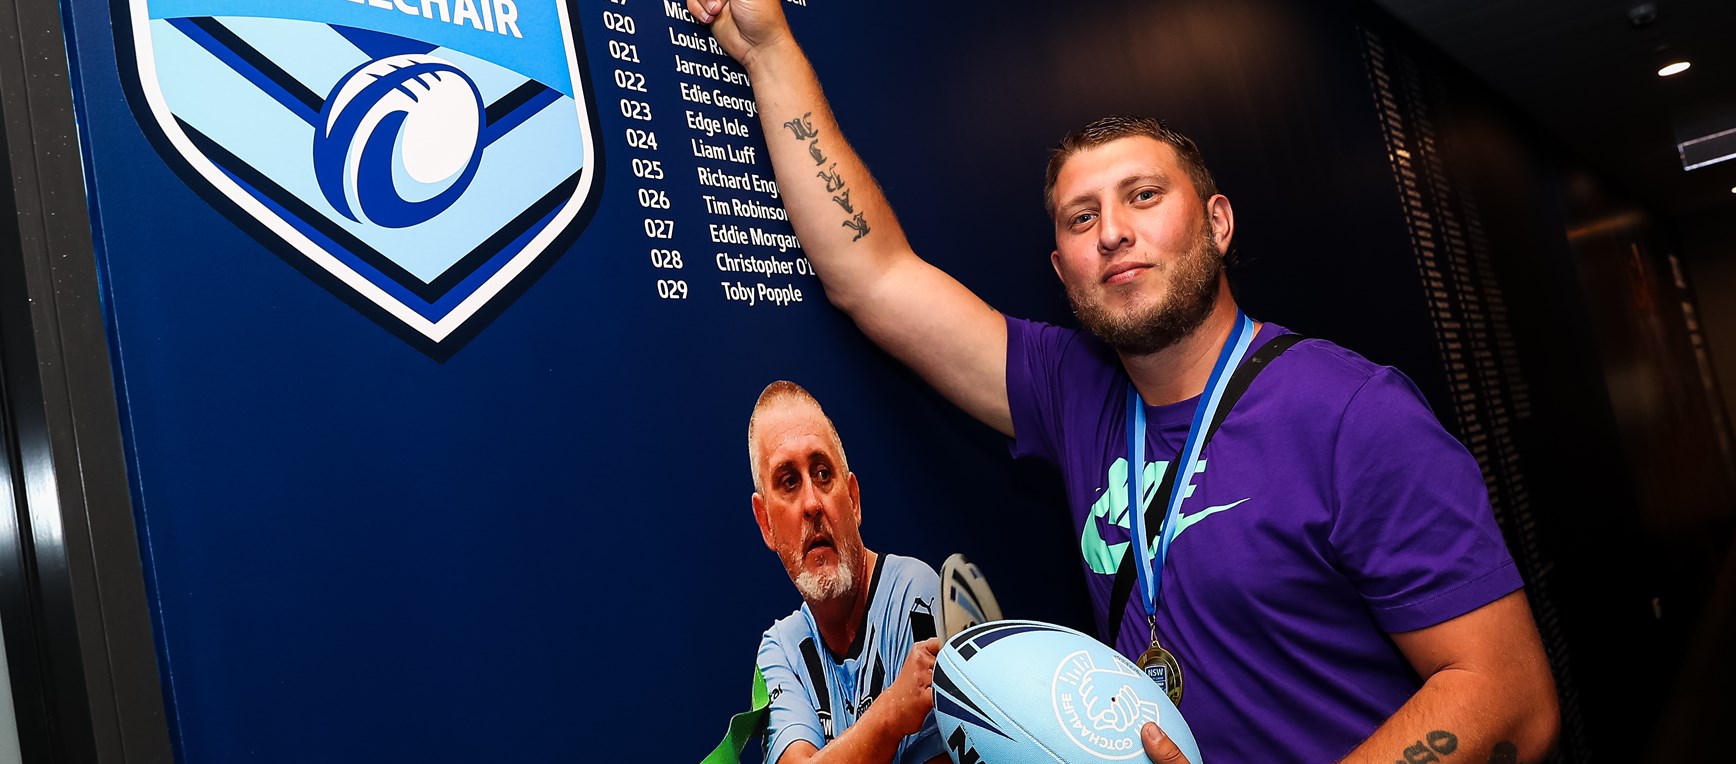 Gallery | NSW Wheelchair Rugby League Medal Presentation